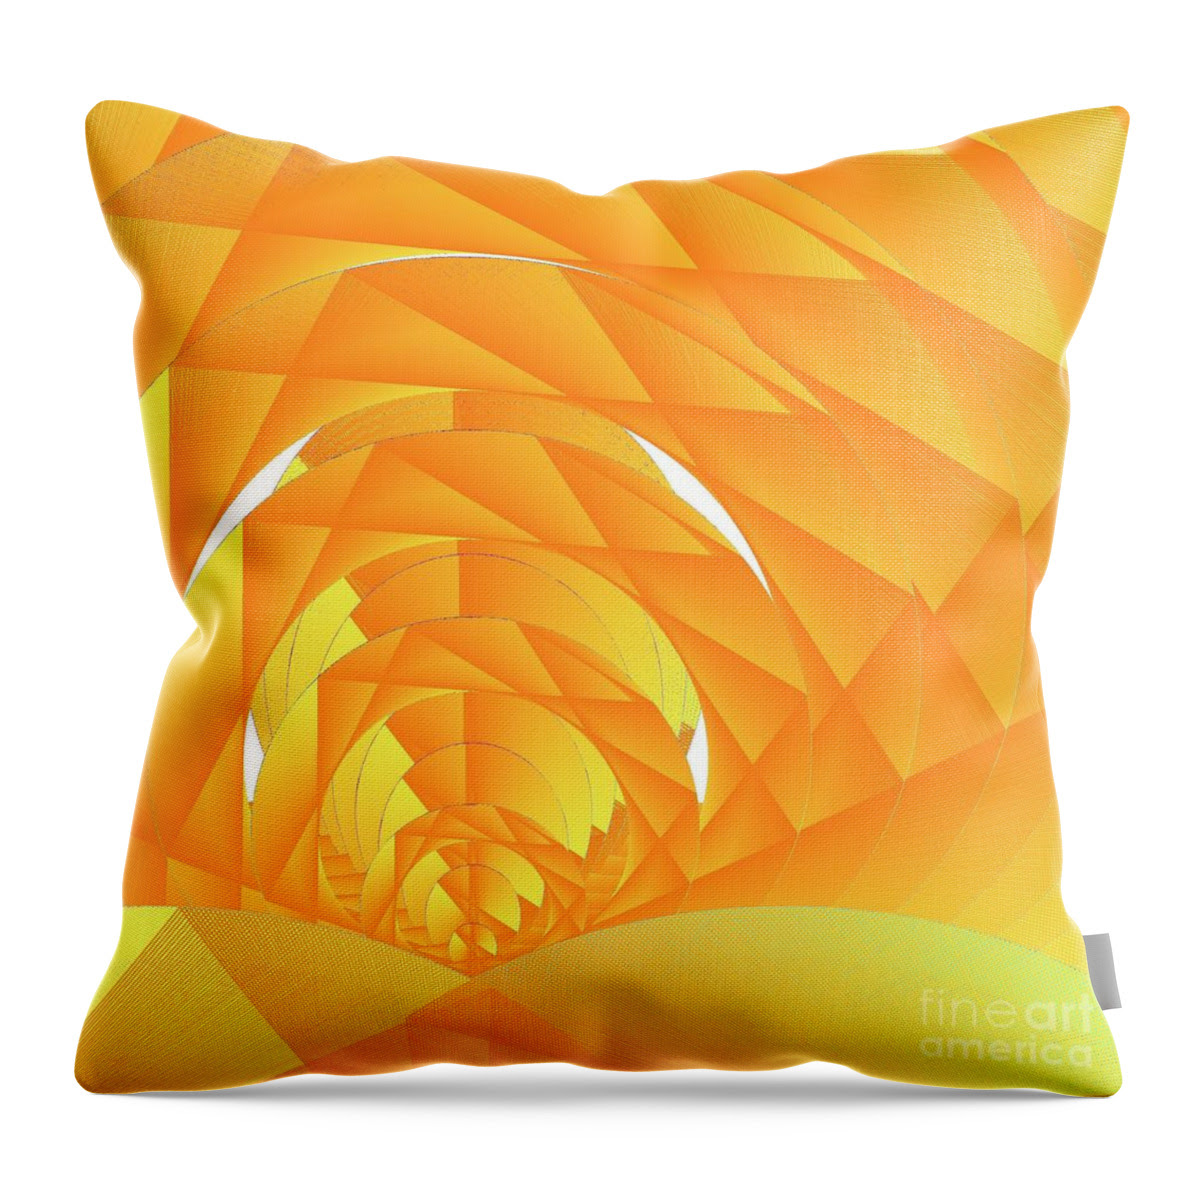 Cyber Sun Throw Pillow featuring the digital art As The Cyber Sun Shrinks And Sets by Michael Skinner